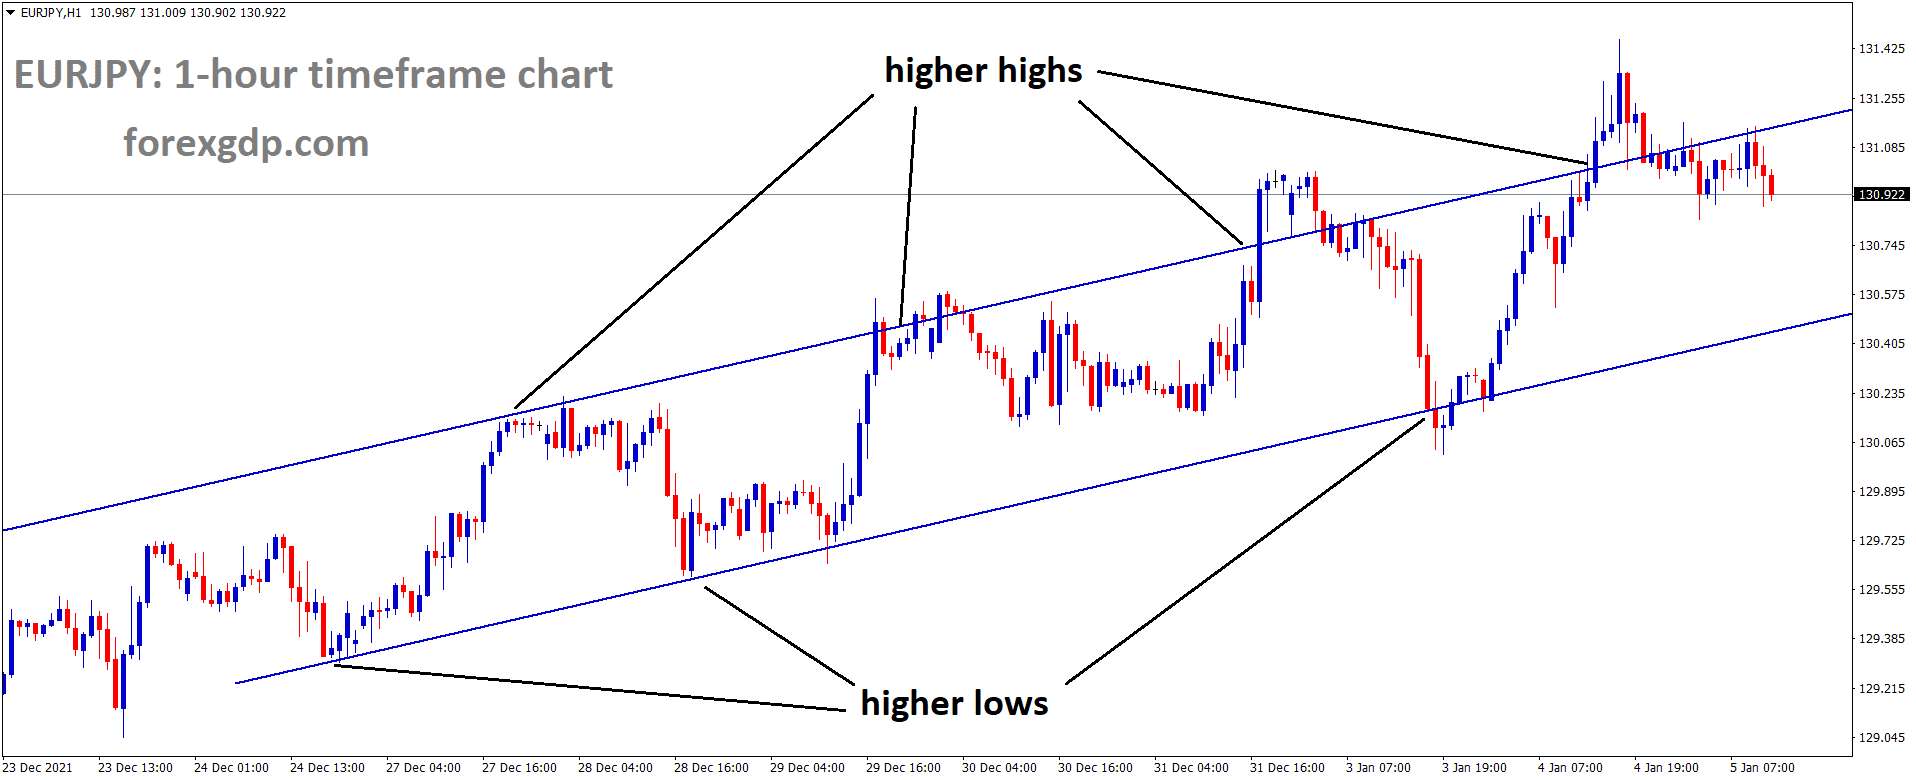 EURJPY is moving in an Ascending channel and the market has fallen from the higher high area of the channel